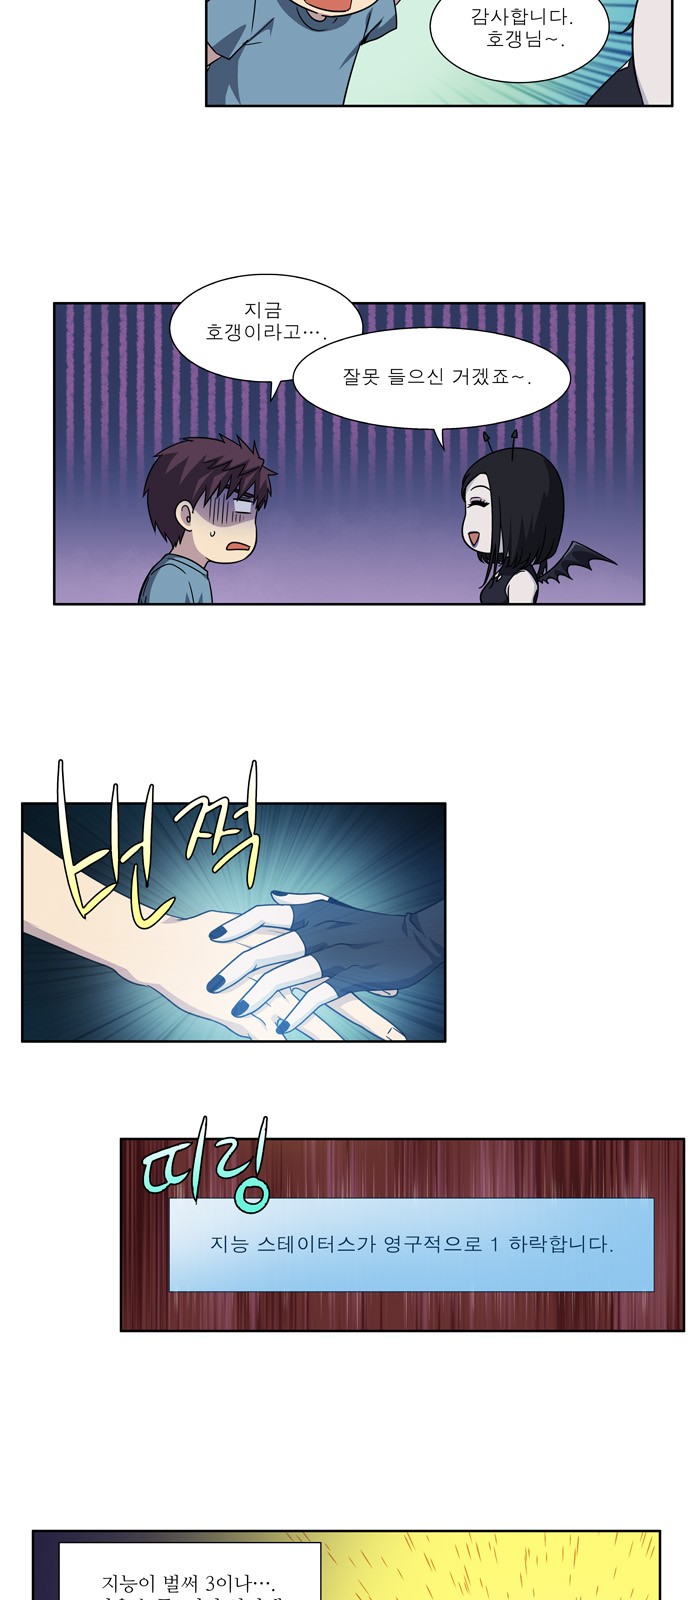 The Gamer - Chapter 283 - Page 2